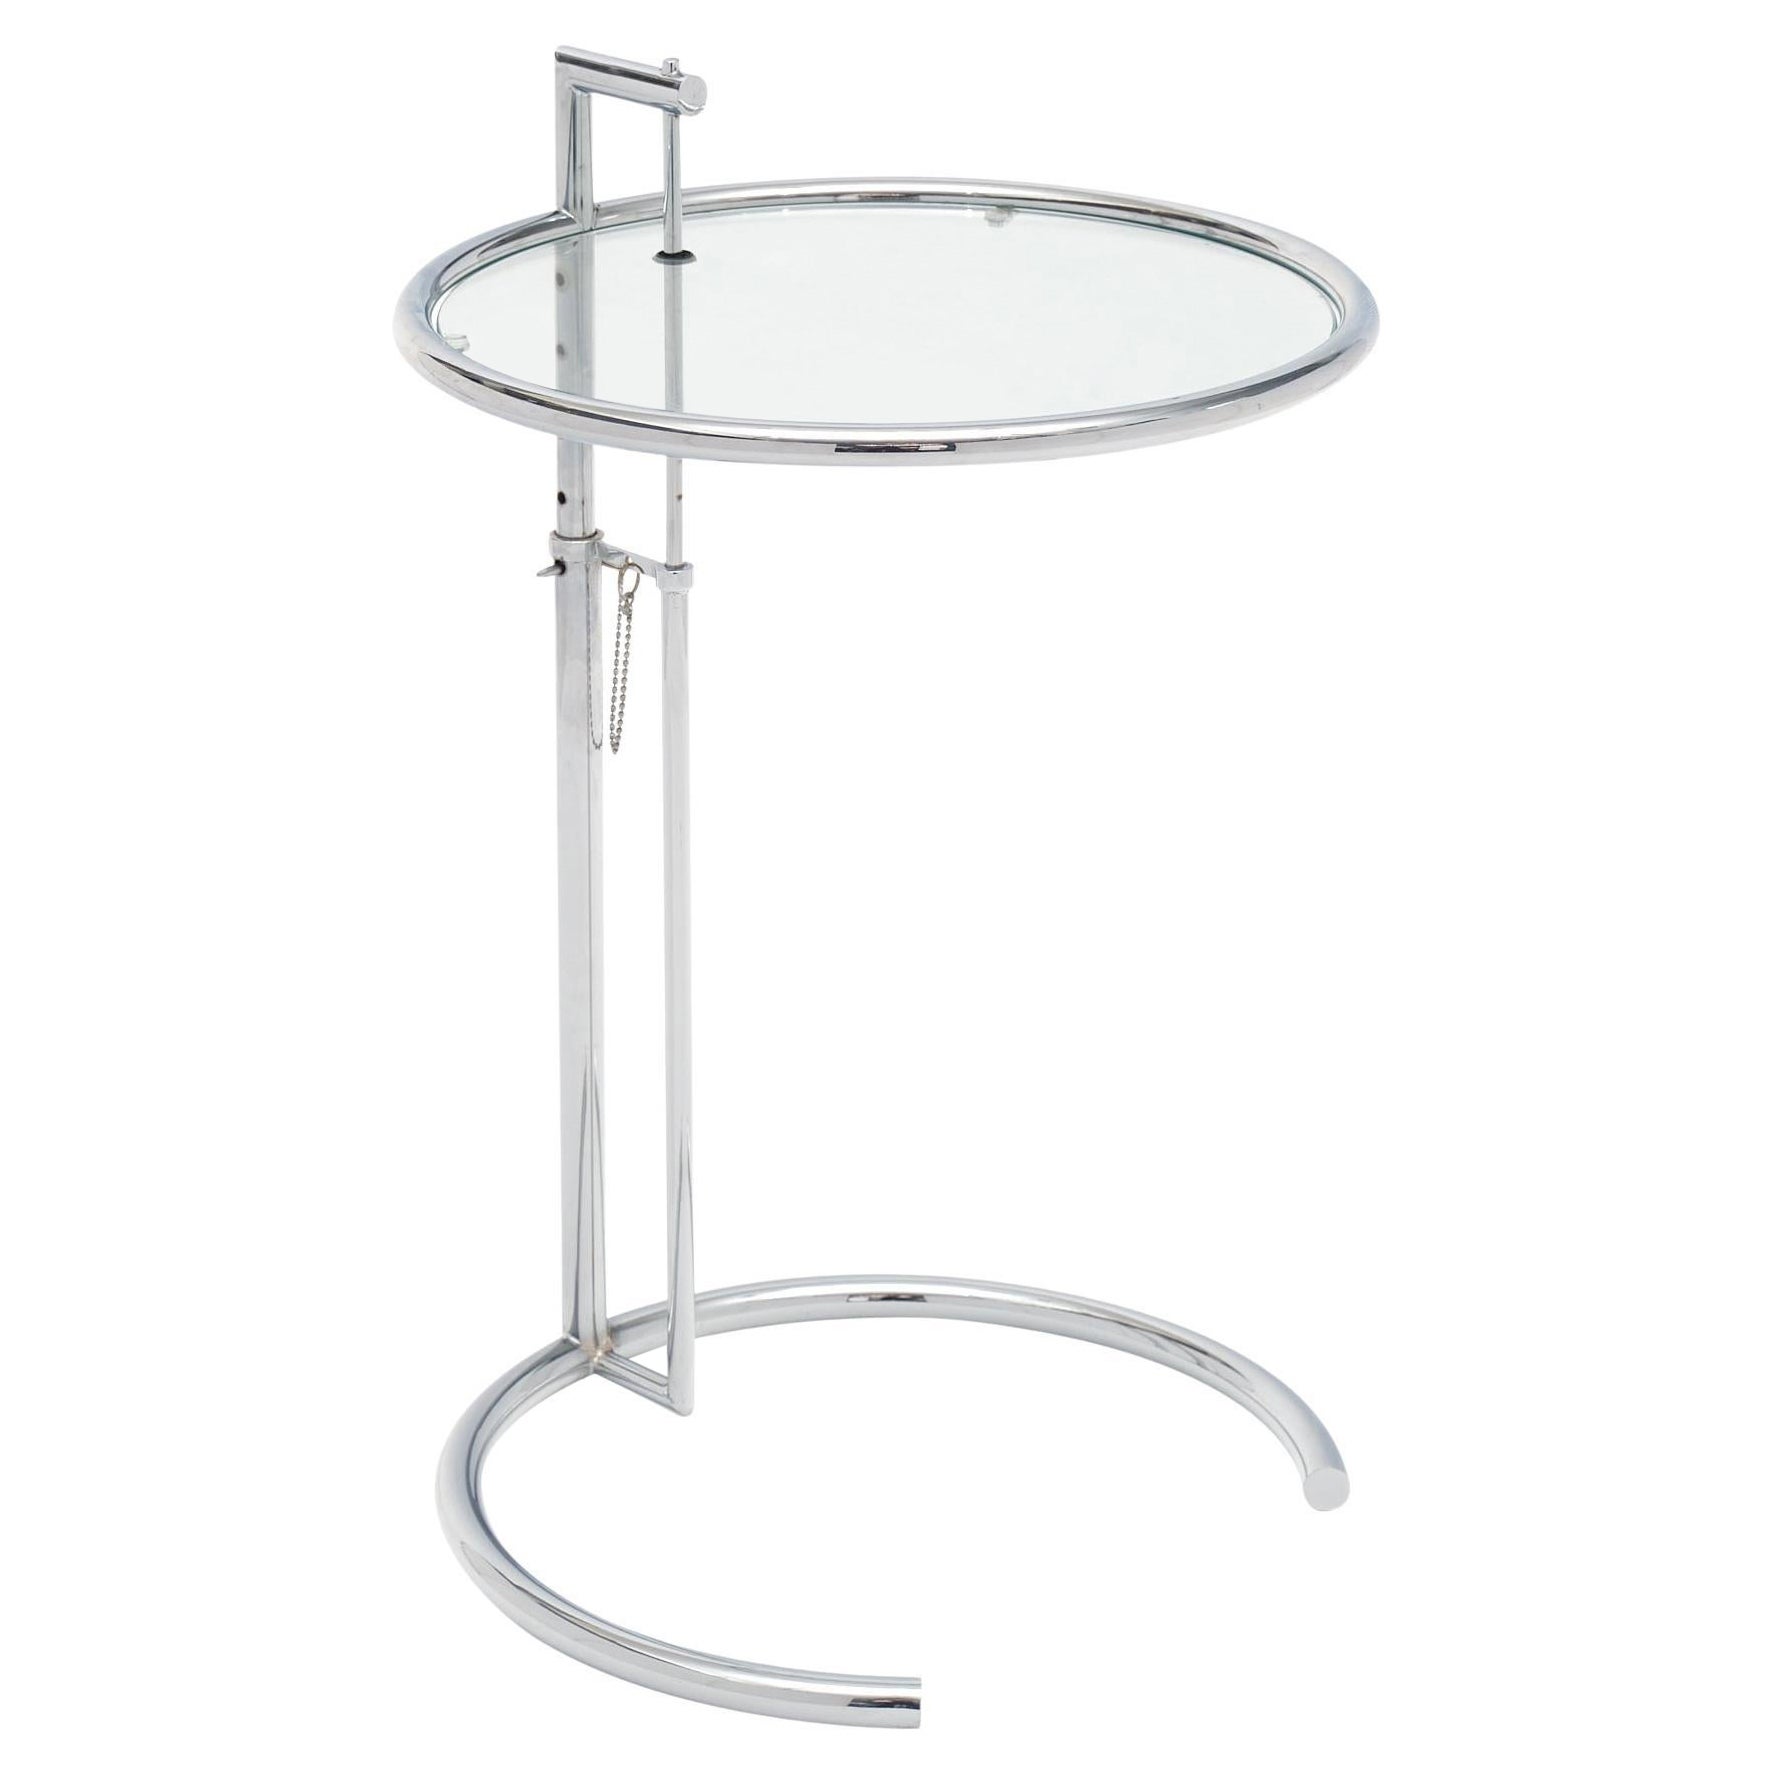 E 1027 Adjustable Table Attributed to Eileen Gray